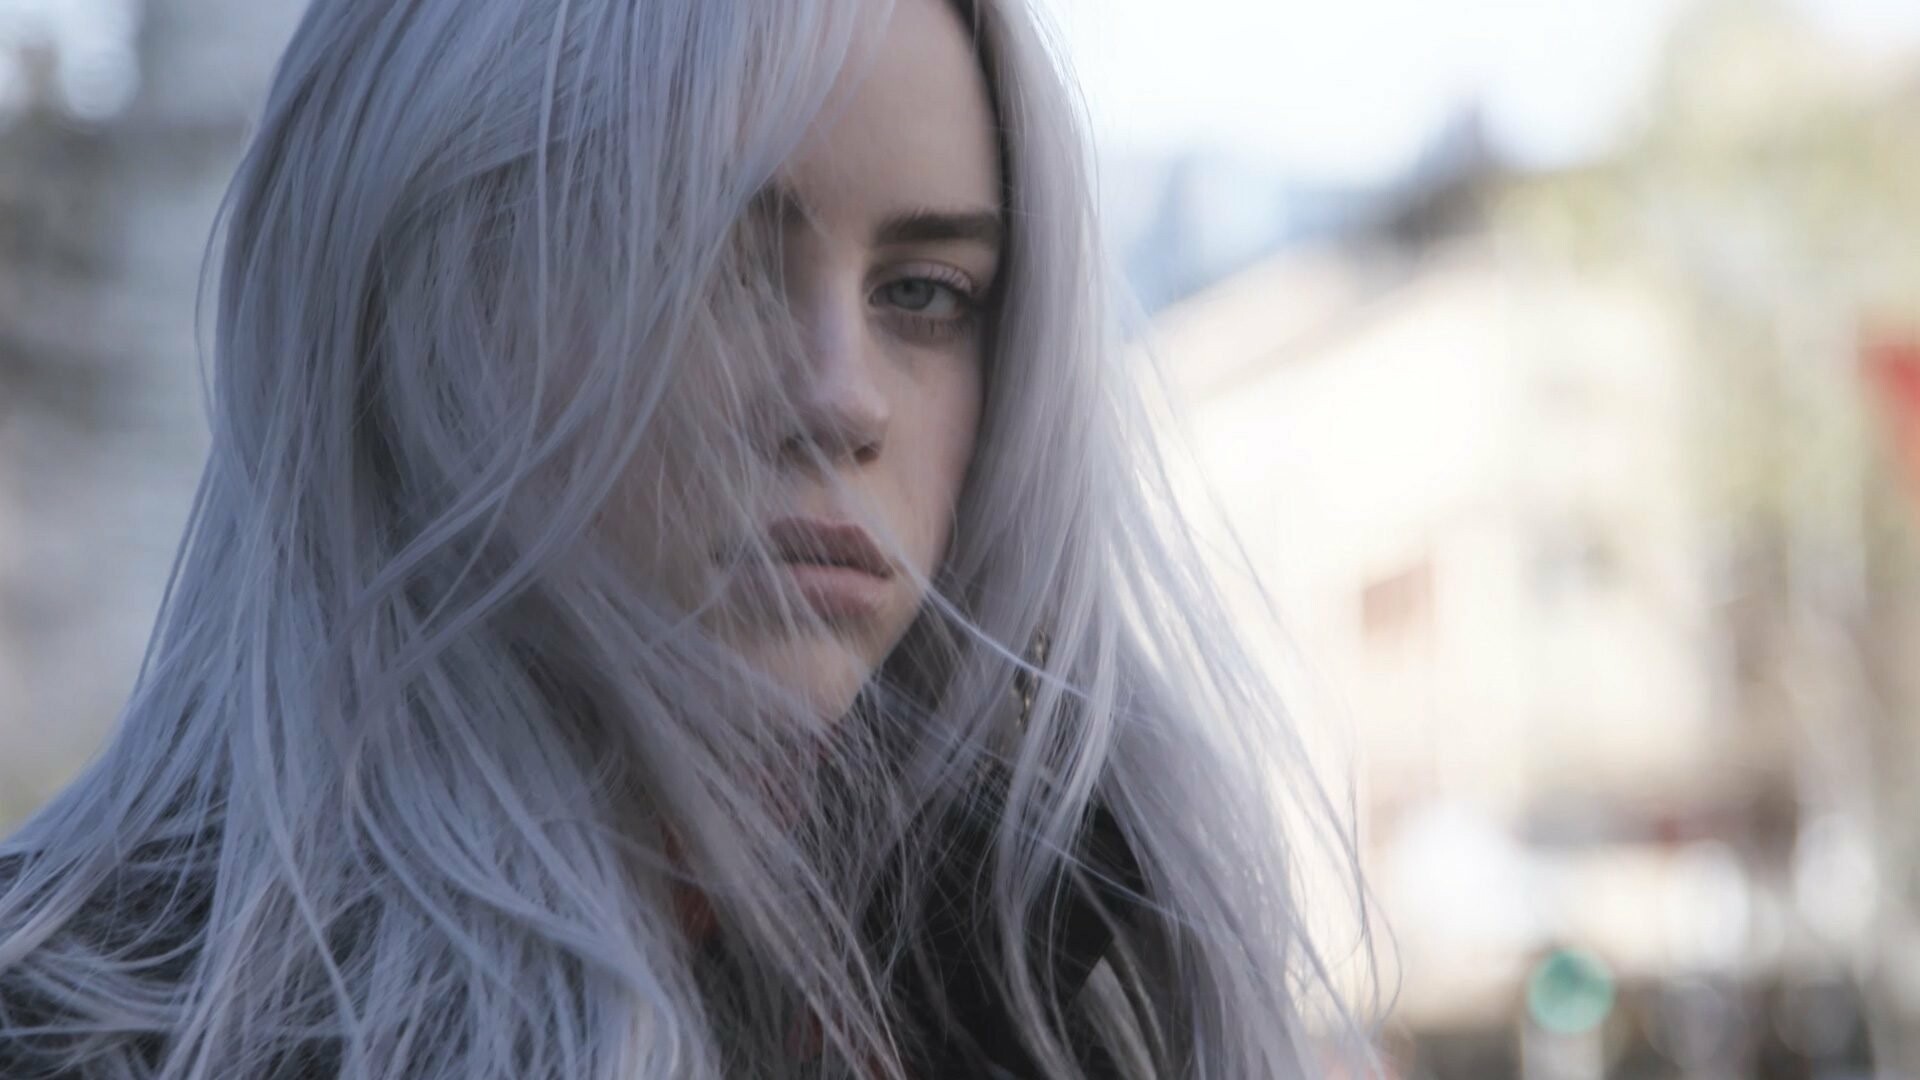 Billie Eilish: “Bad Guy”, A Grammy in 2020 for song of the year. 1920x1080 Full HD Background.